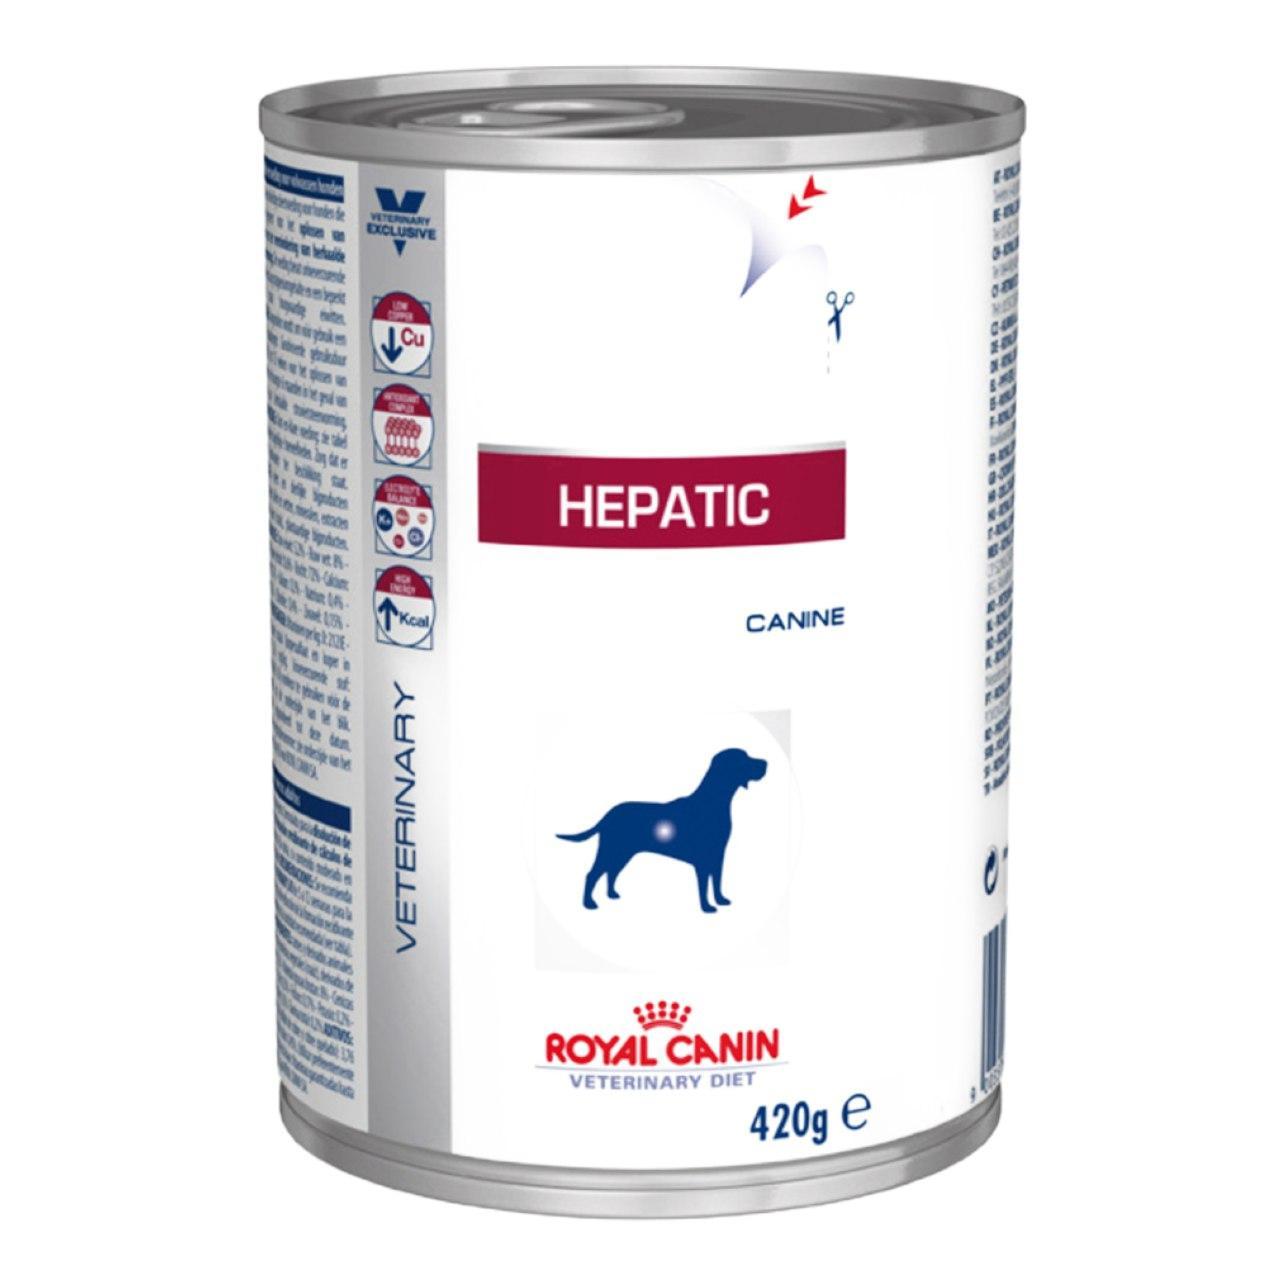 An image of Royal Canin Canine Hepatic